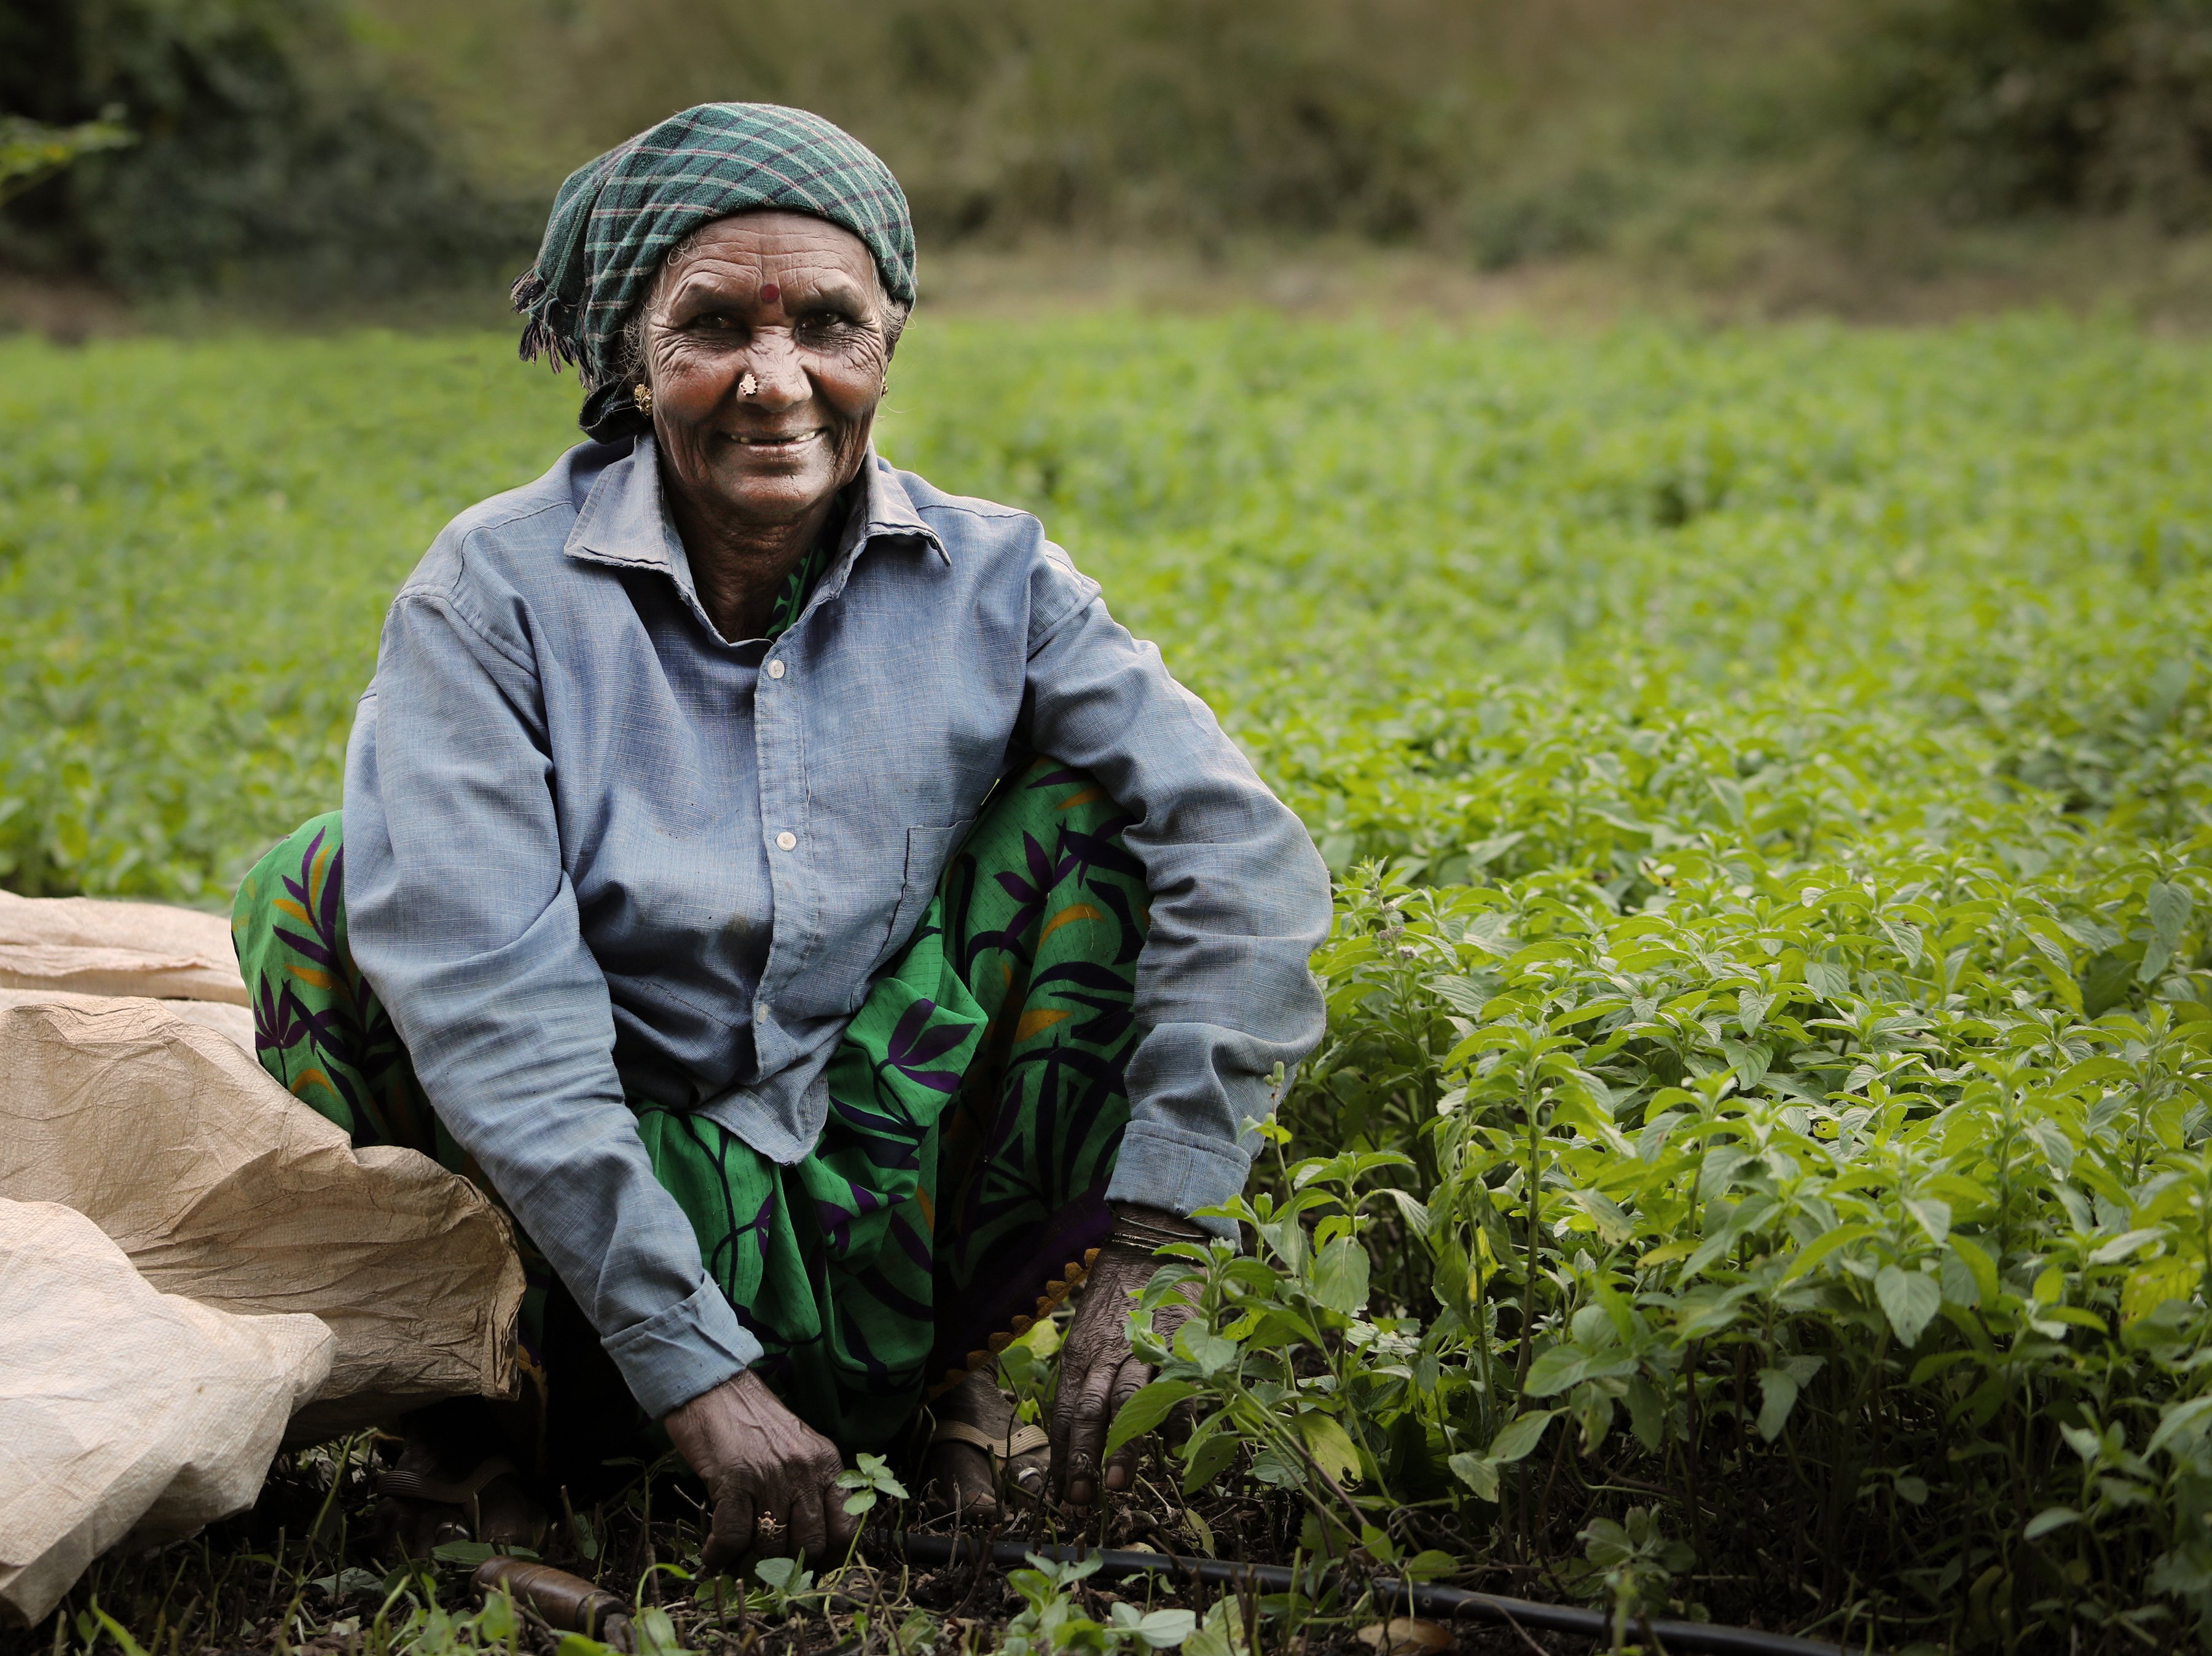 A fair trade farmer in India pauses from field work to pose for the camera. Female farmers in India are benefitting from fair-trade practices when it comes to sourcing organic botanicals that are grown in their region. An elderly woman tending to crops in India.